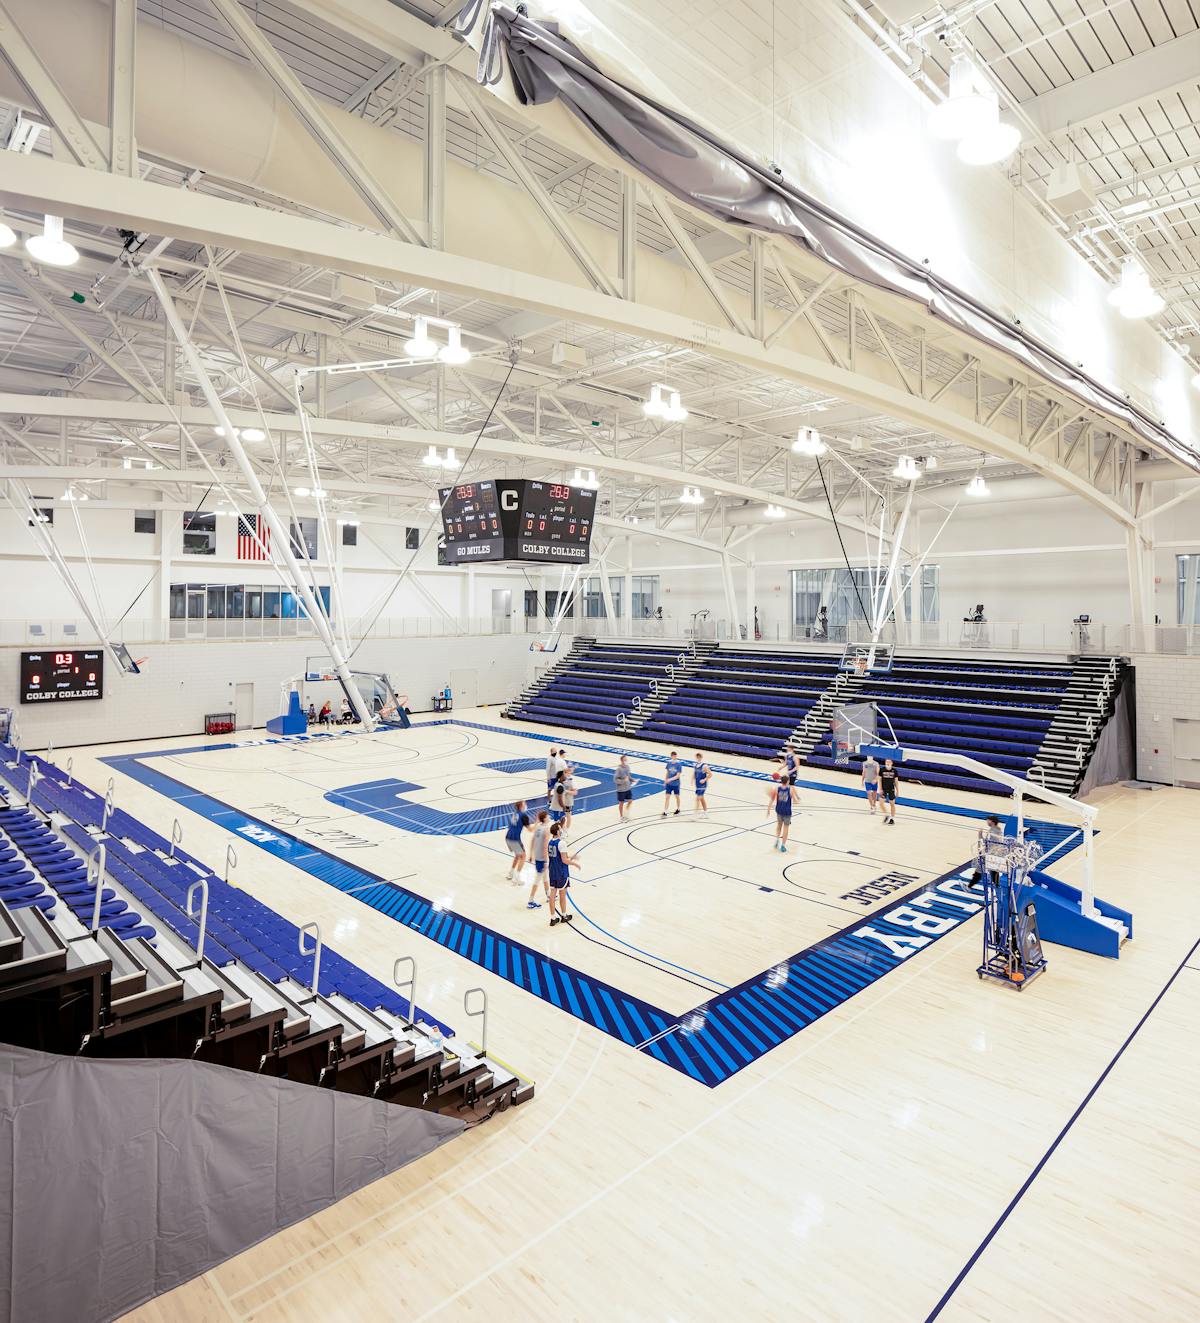 Basketball court, Harold Alfond Athletics and Recreation Center, Colby College